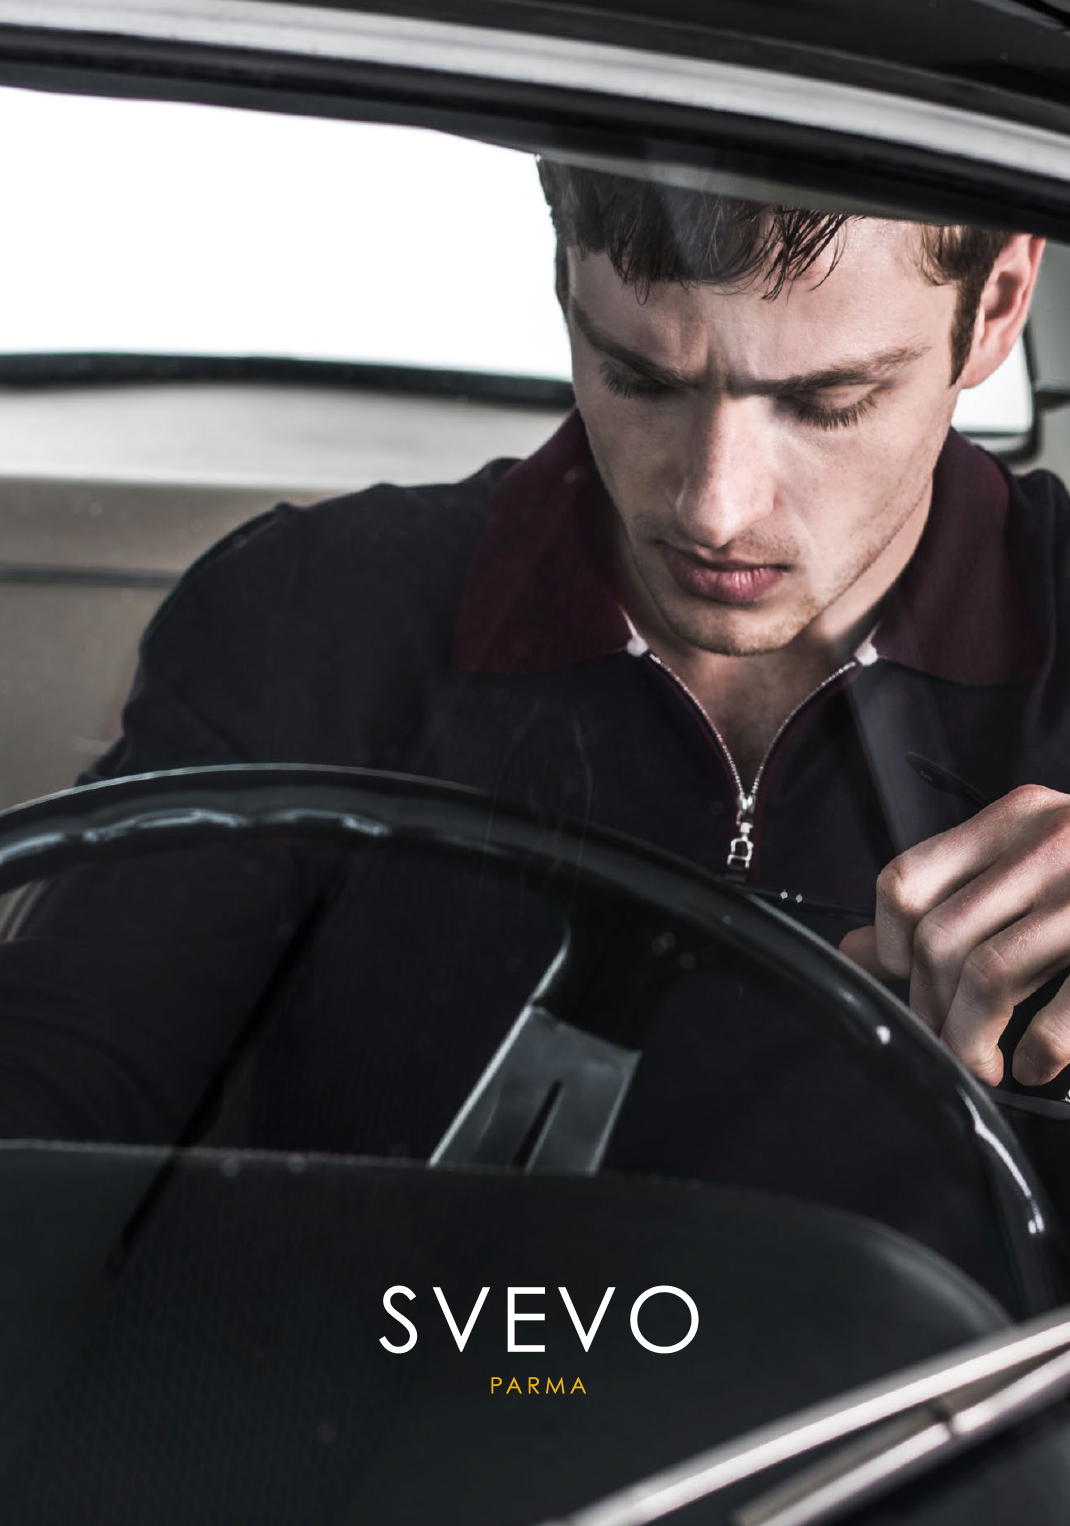 Svevo Parma catalogue styling: cashmere sweater and car